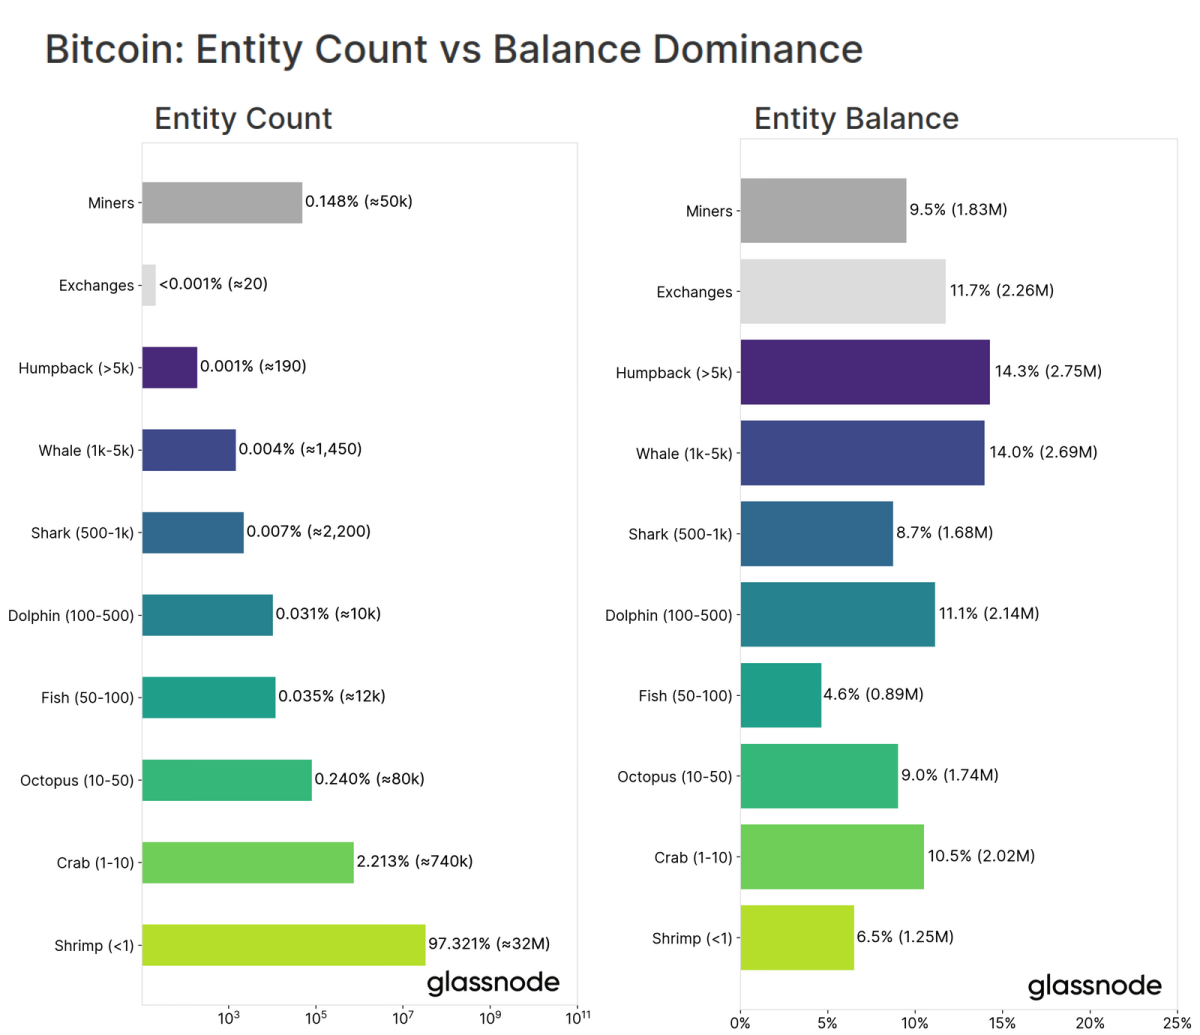 Shrimps and crabs hold the majority of BTC. Source: Glassnode